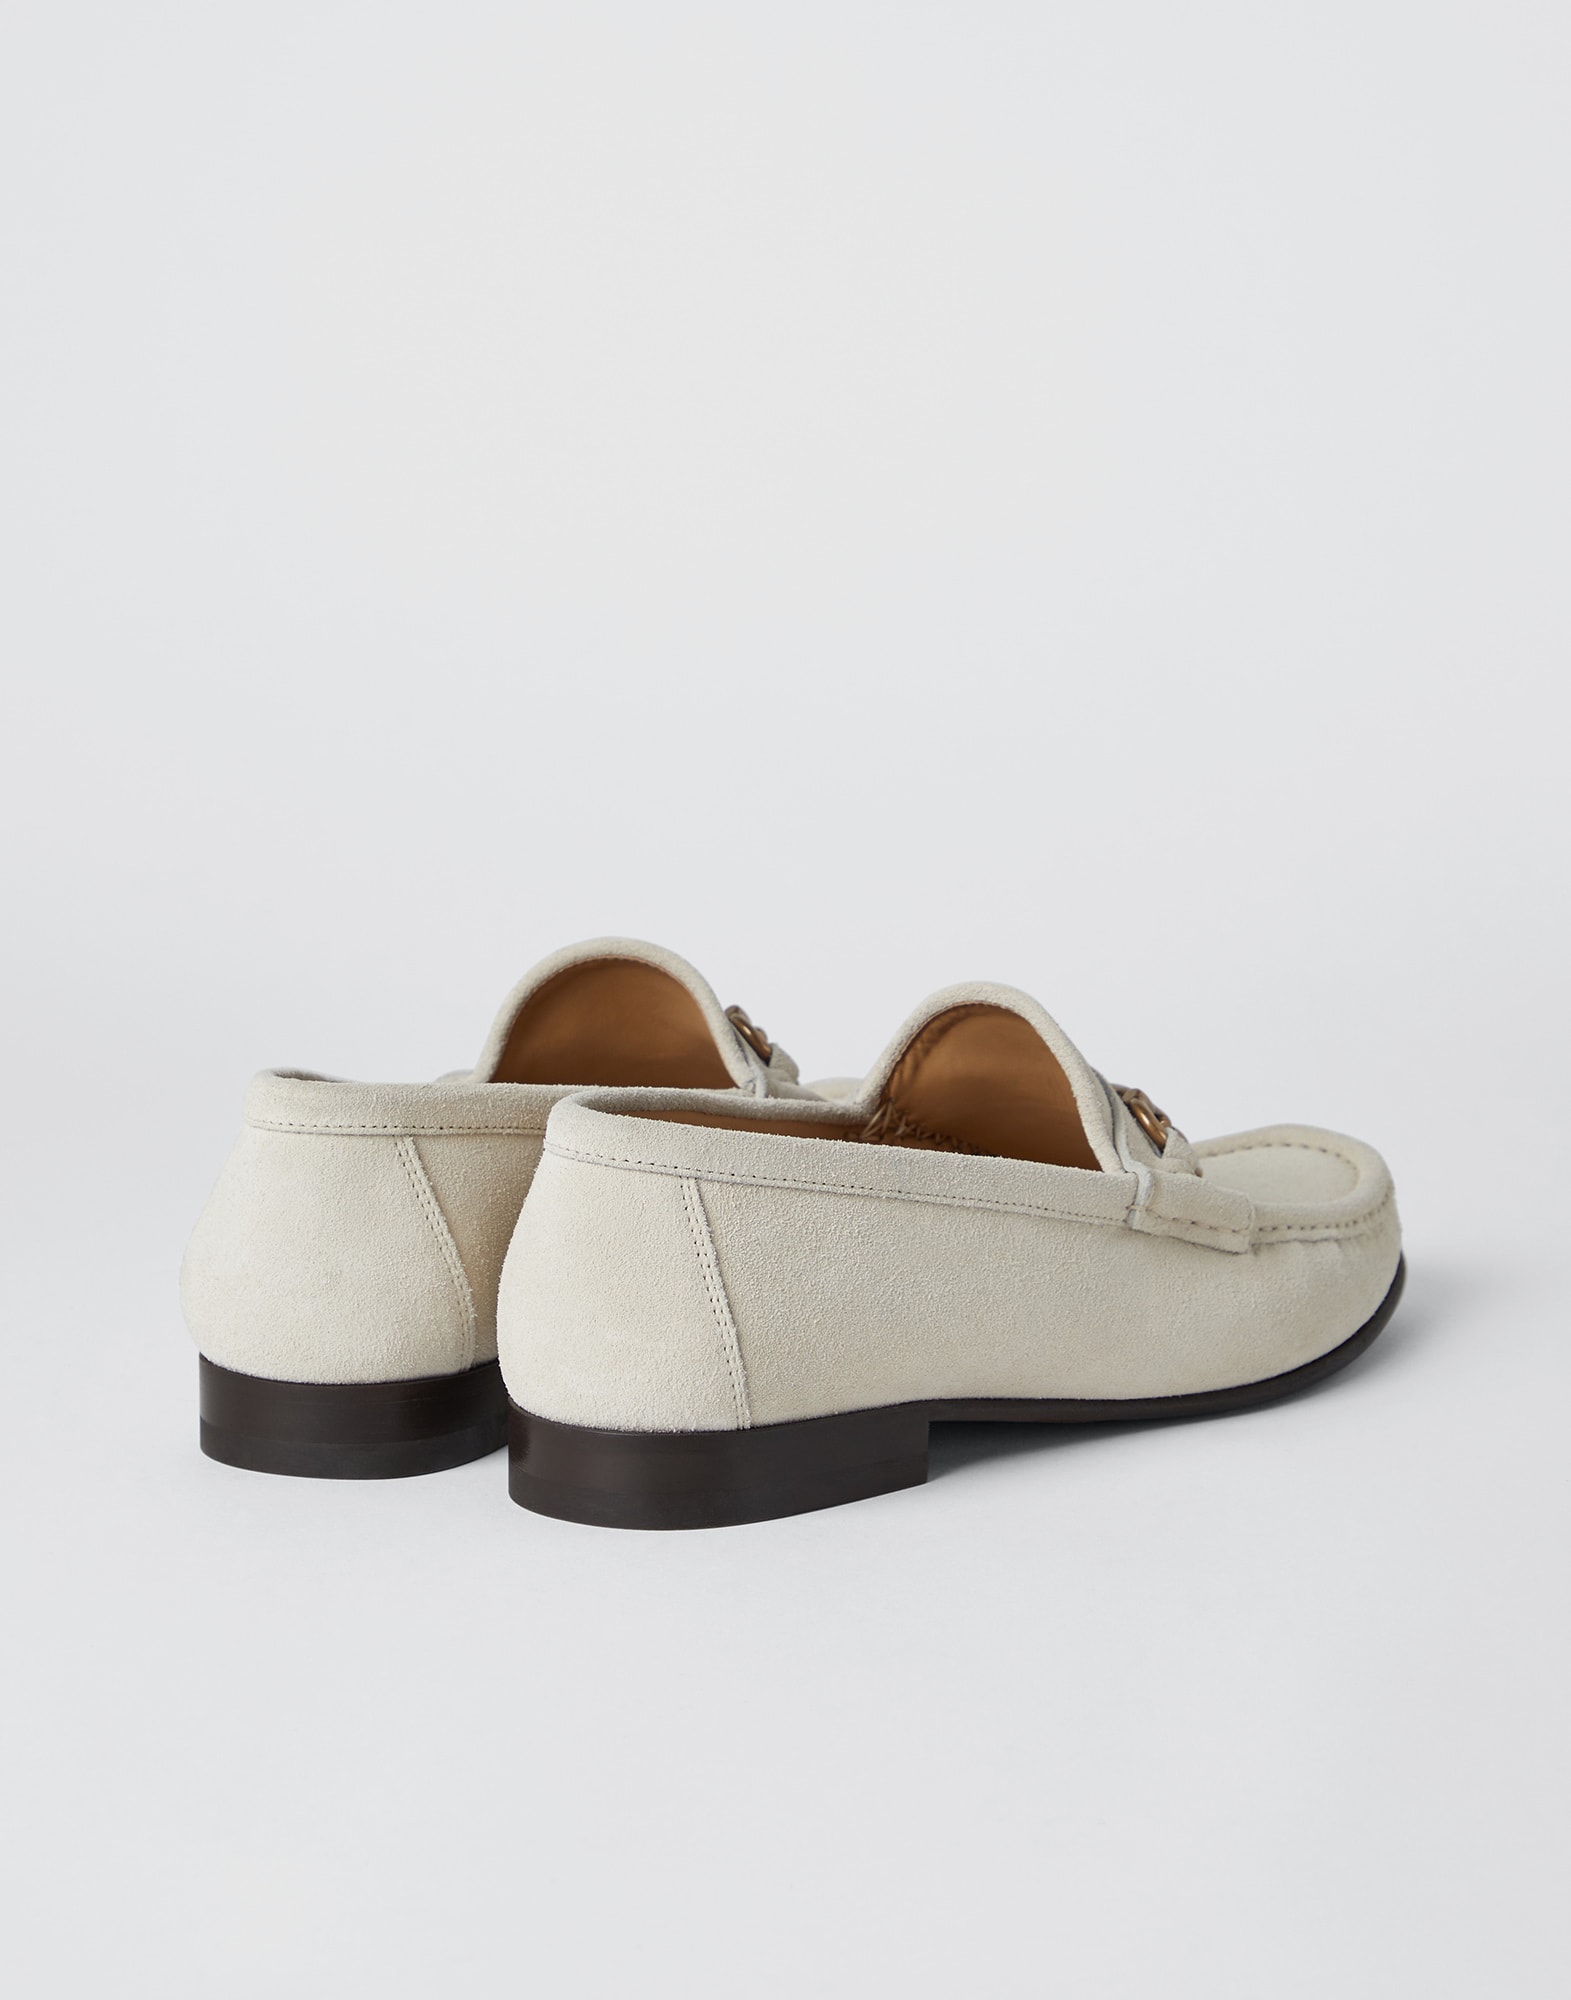 Suede loafers (241MZUPEAV797) for Man | Brunello Cucinelli